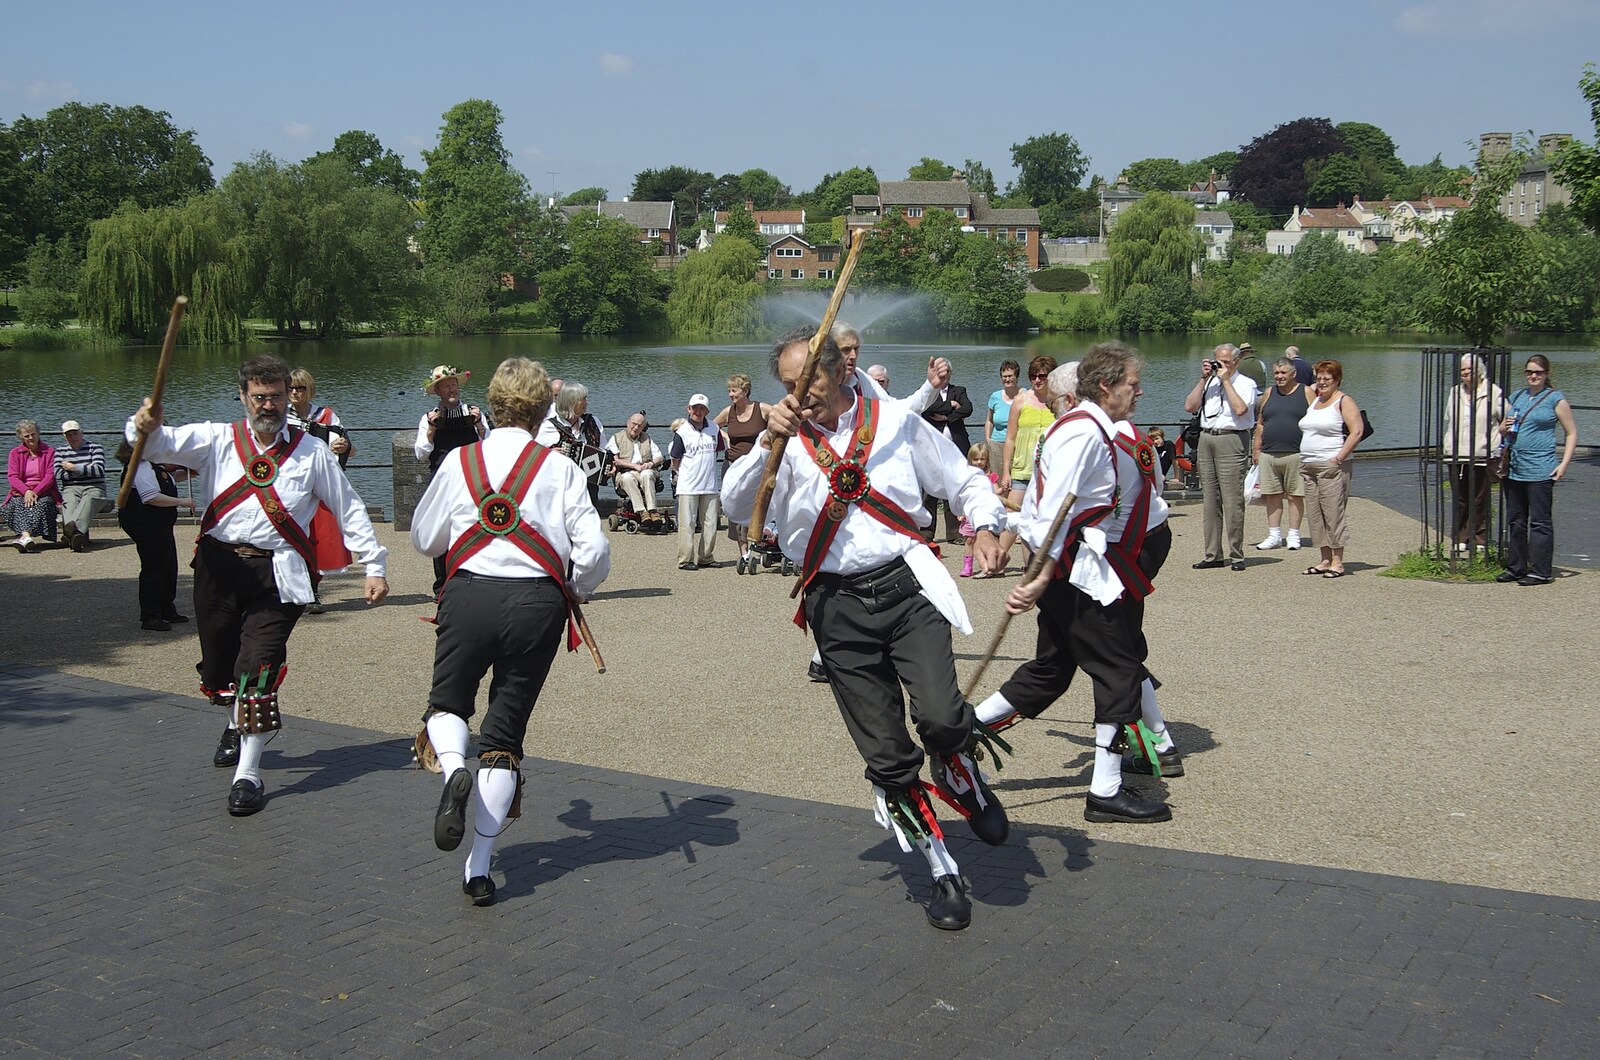 Morris Dancing, and Rick Wakeman Opens the Park Pavillion Mural, Diss, Norfolk - 30th May 2008: The Hoxne Hundred do something with sticks